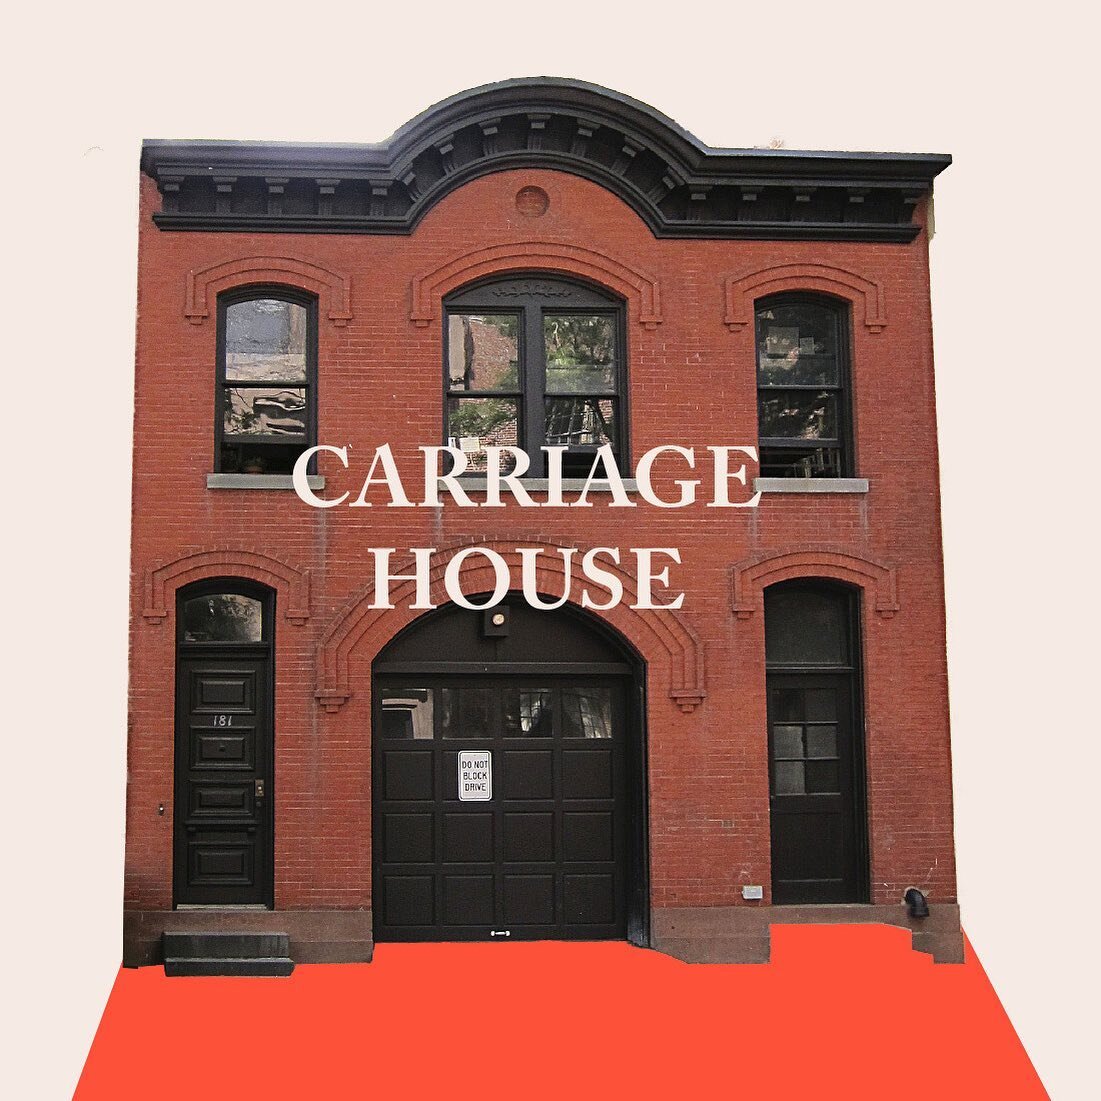 This Clinton Hill carriage house may no longer be a stable, but it's where you'll feel stable if you live in this place, or any of the surrounding buildings. Clinton Hill is one of the safest places in the world, and it's perfect for those who want t